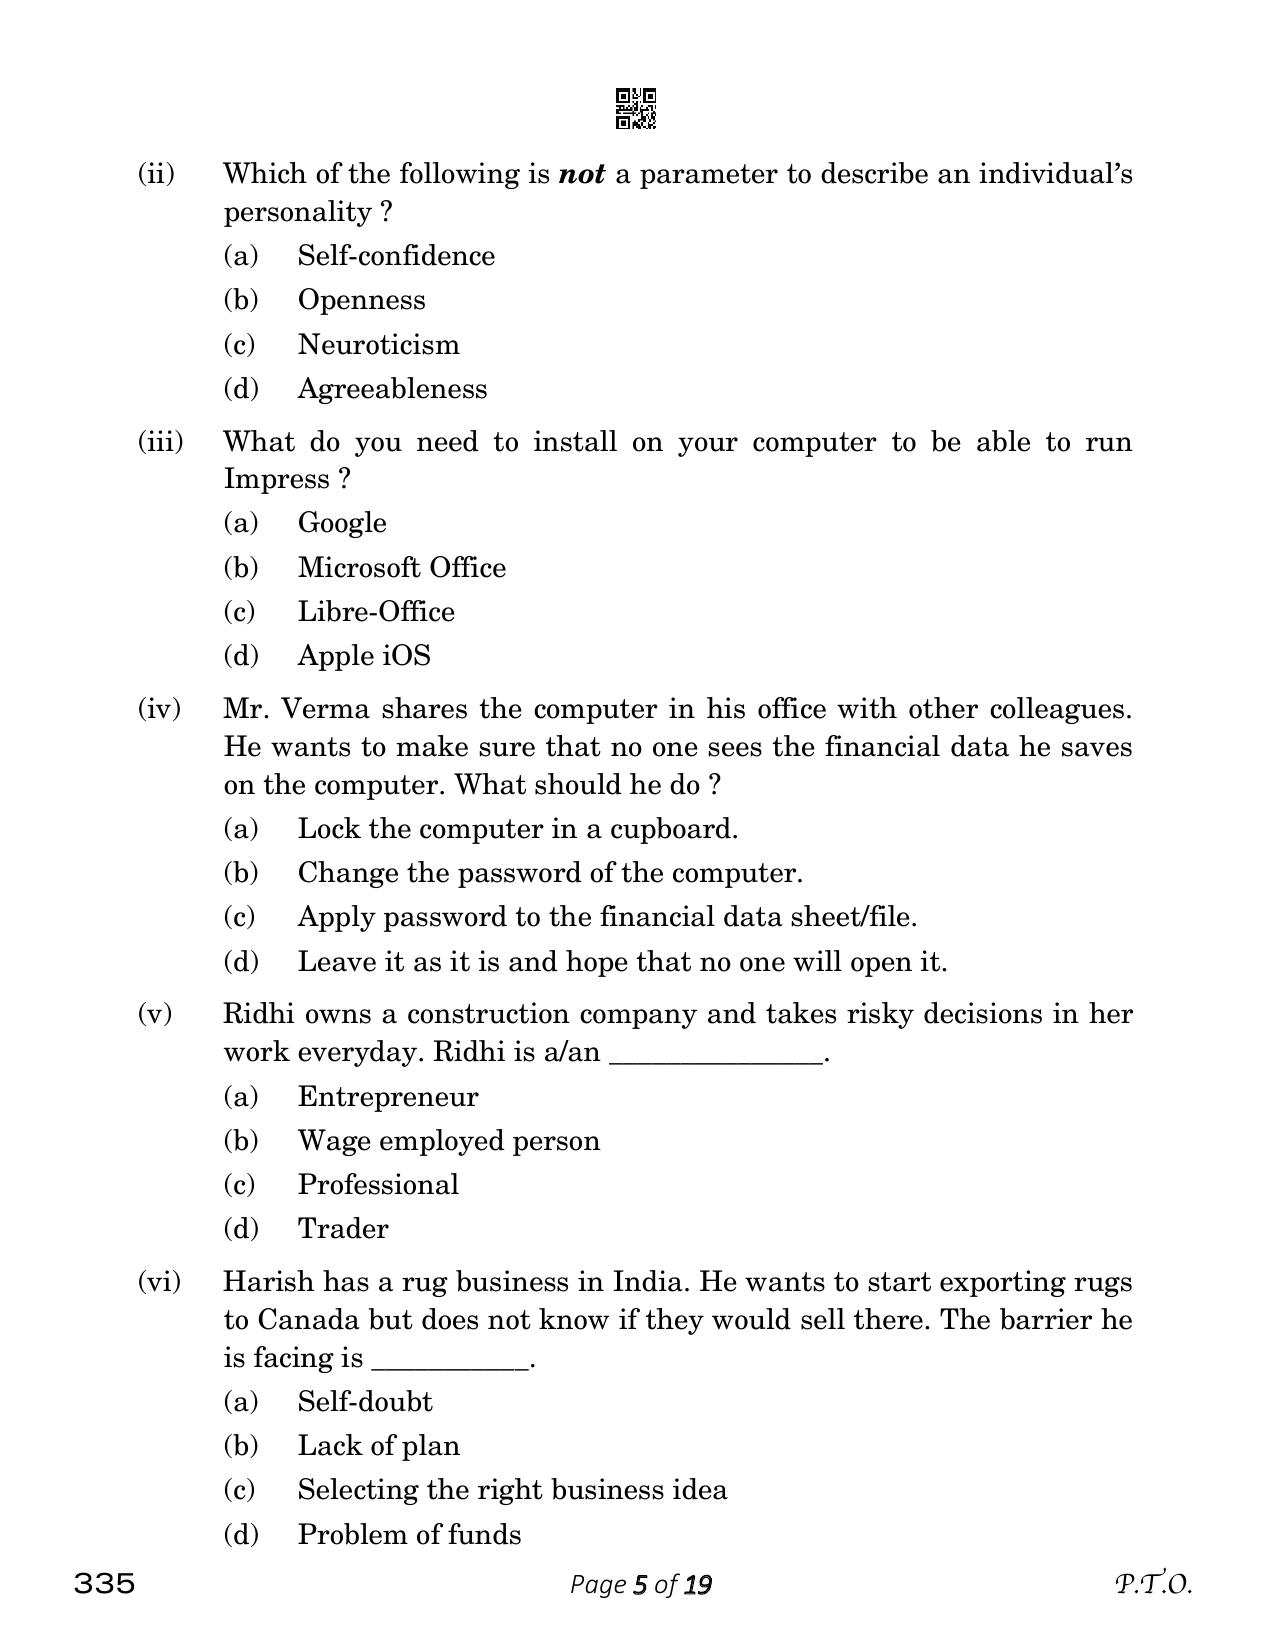 CBSE Class 12 Banking (Compartment) 2023 Question Paper - Page 5